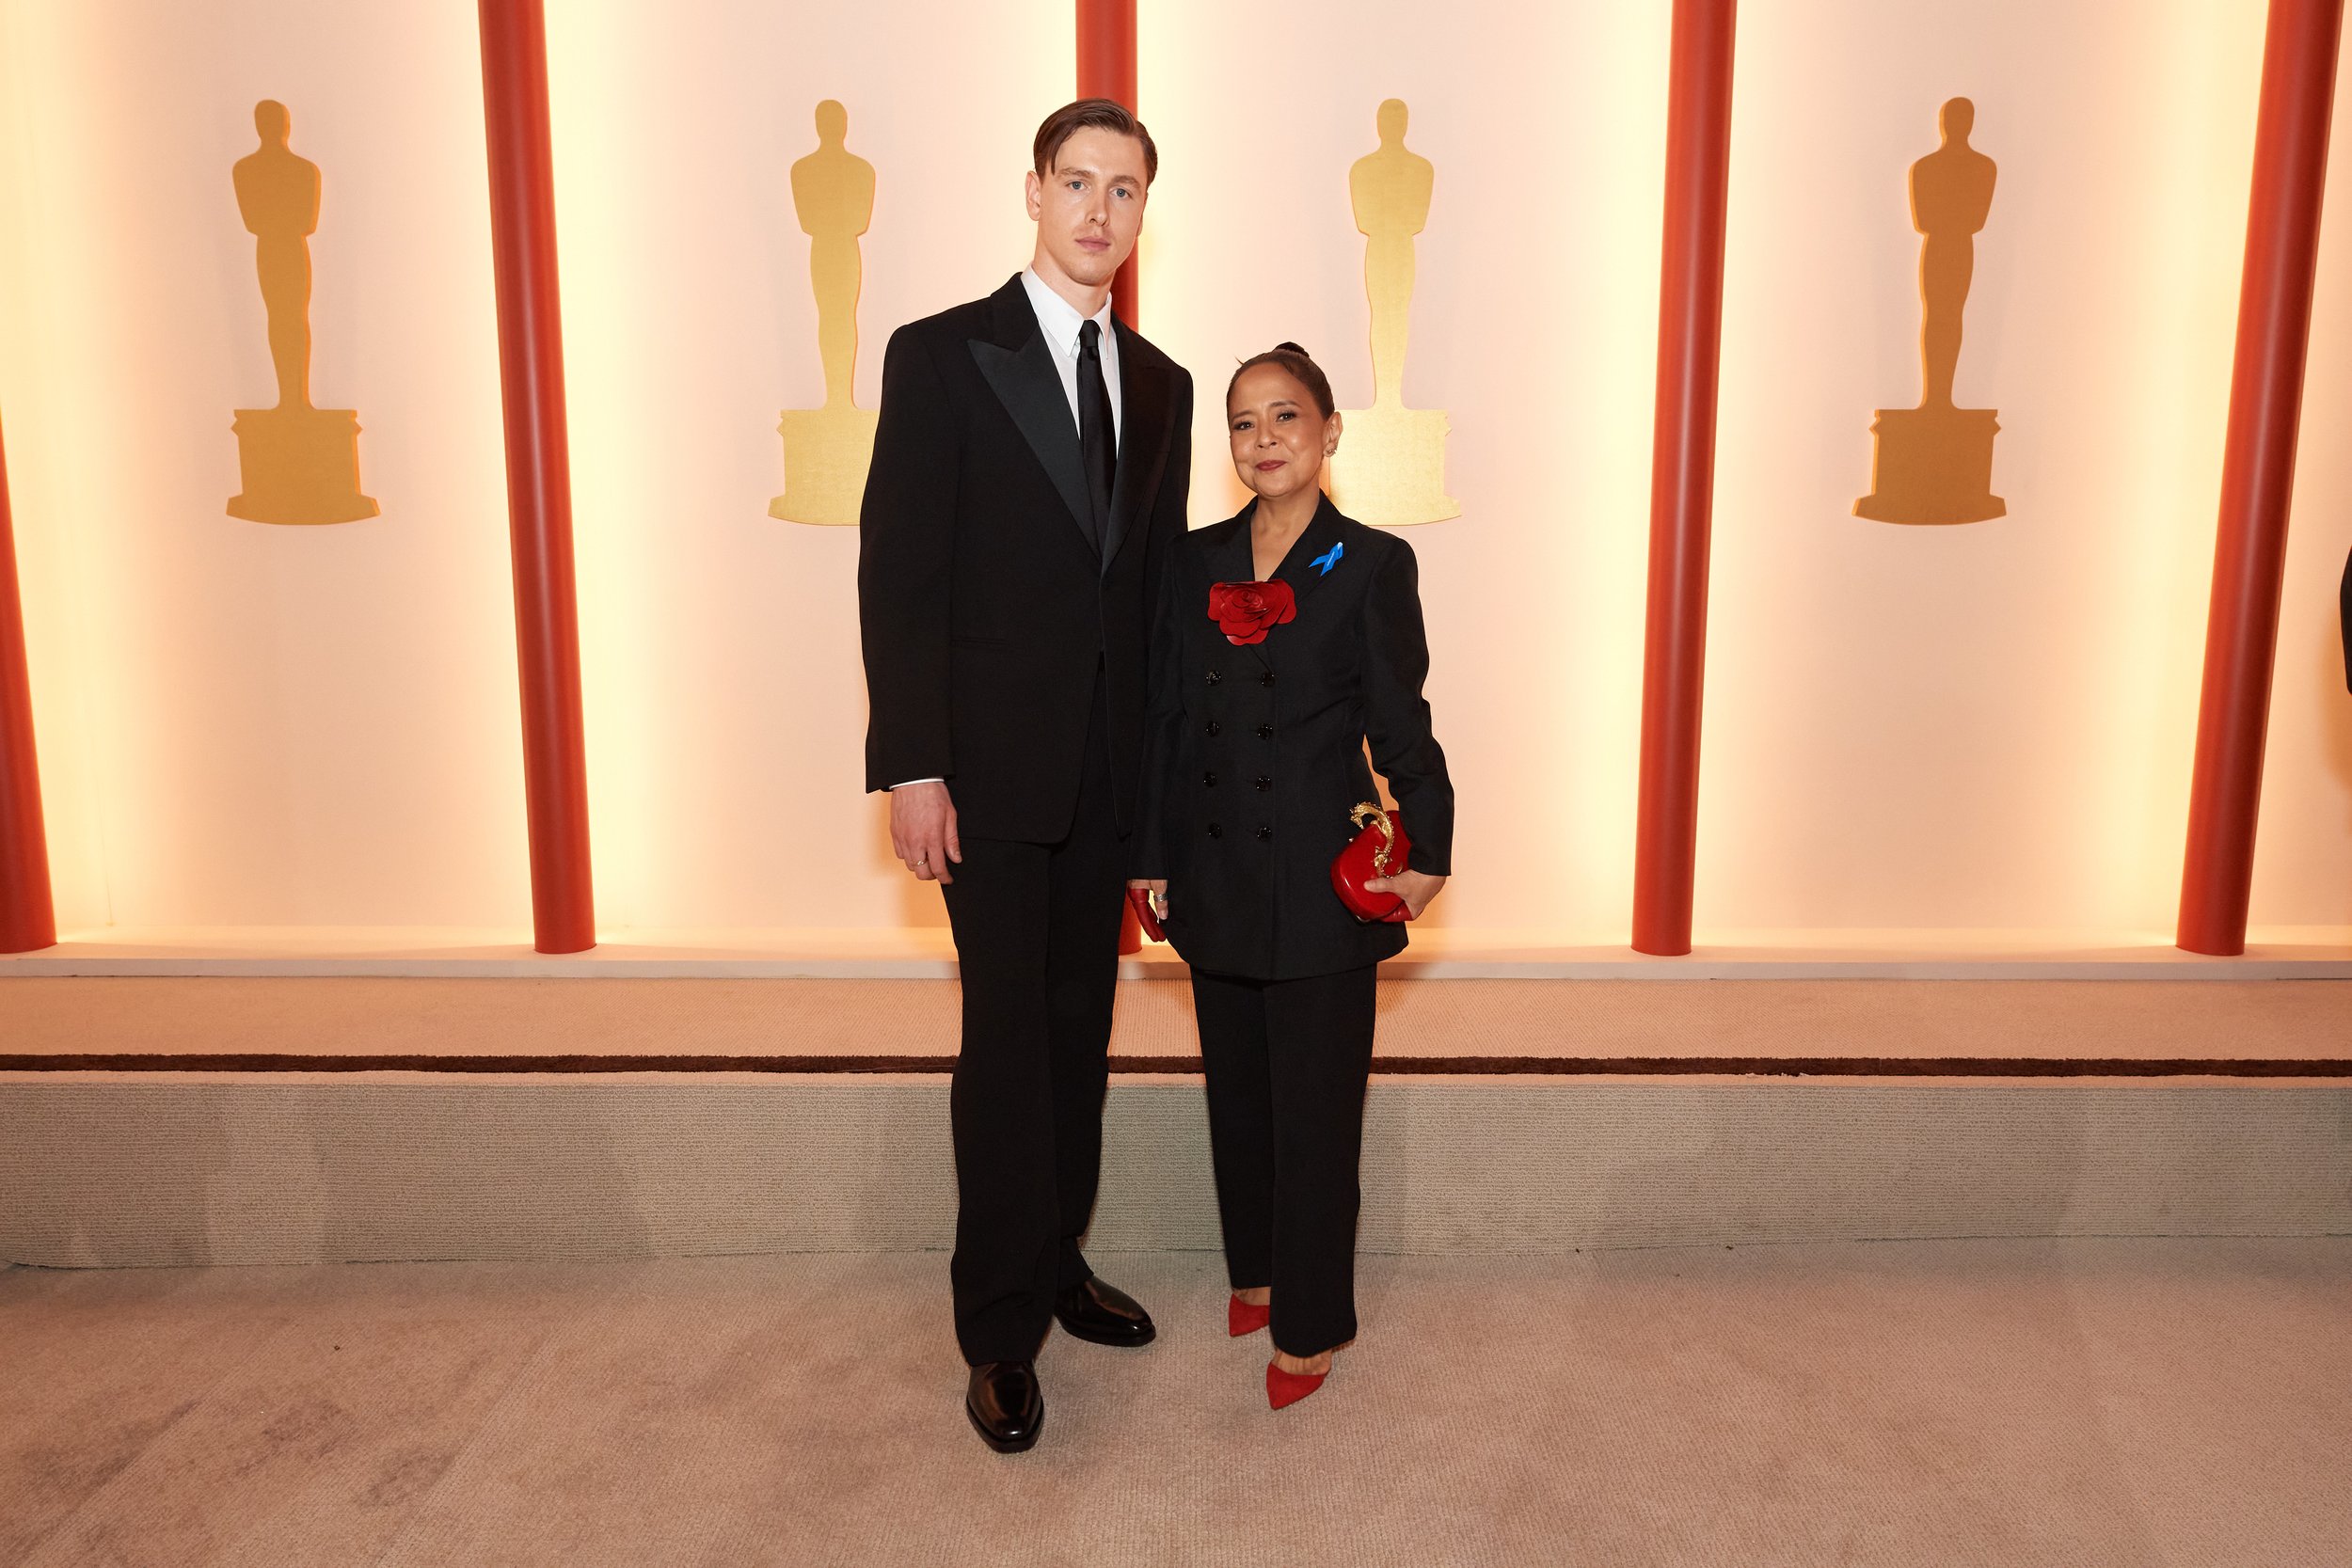 Harris Dickinson and Dolly De Leon arrive on the red carpet of The 95th Oscars